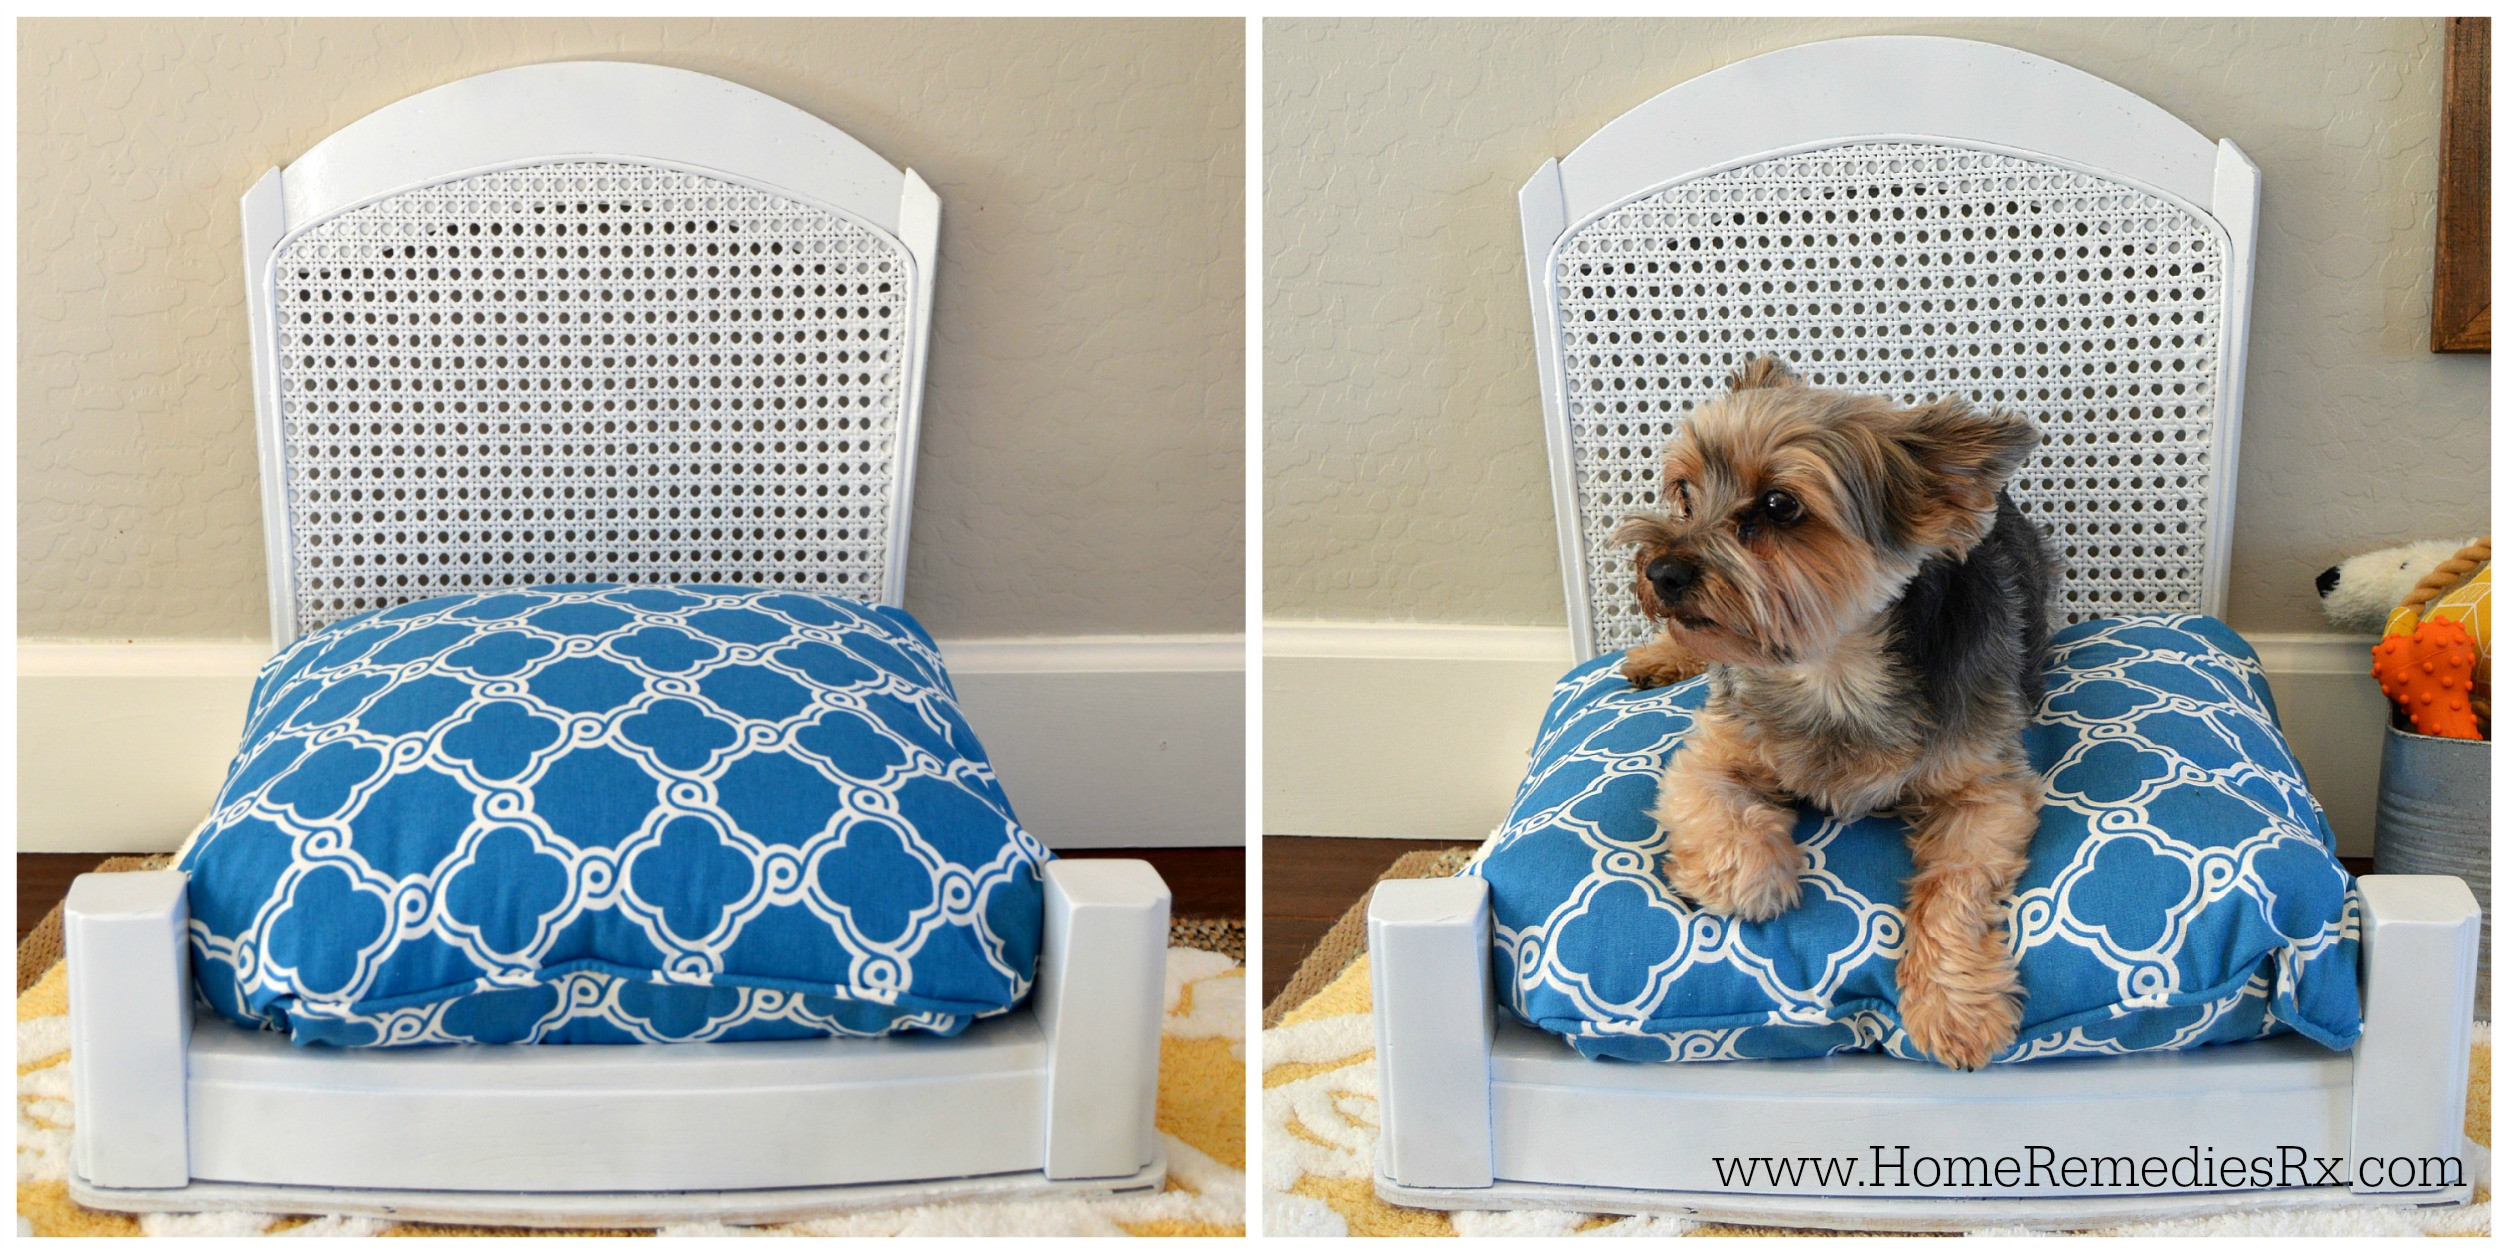 Best ideas about DIY Pet Bed
. Save or Pin DIY pet bed made from a chair Now.